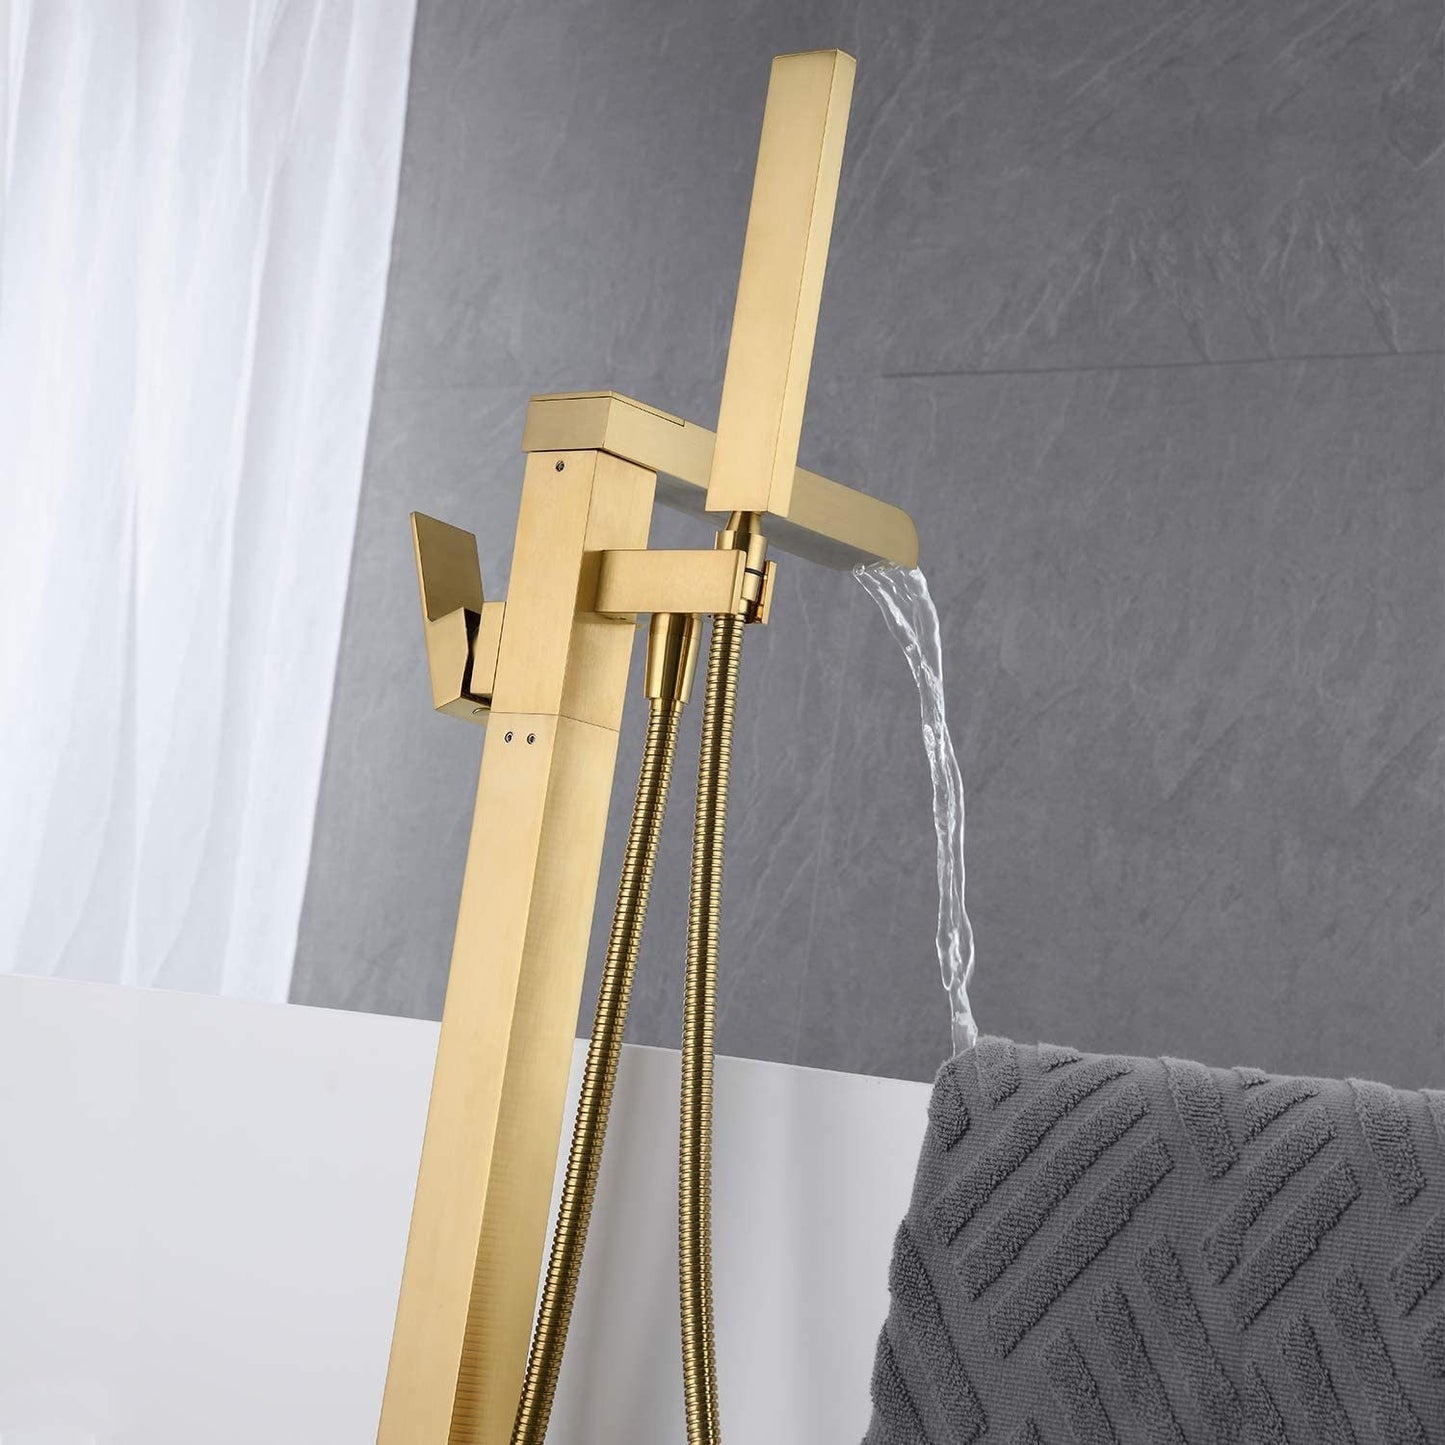 Bathroom Freestanding Waterfall Tub filler Brushed Gold Floor Mount Faucet with Hand Shower Home Decor by Design